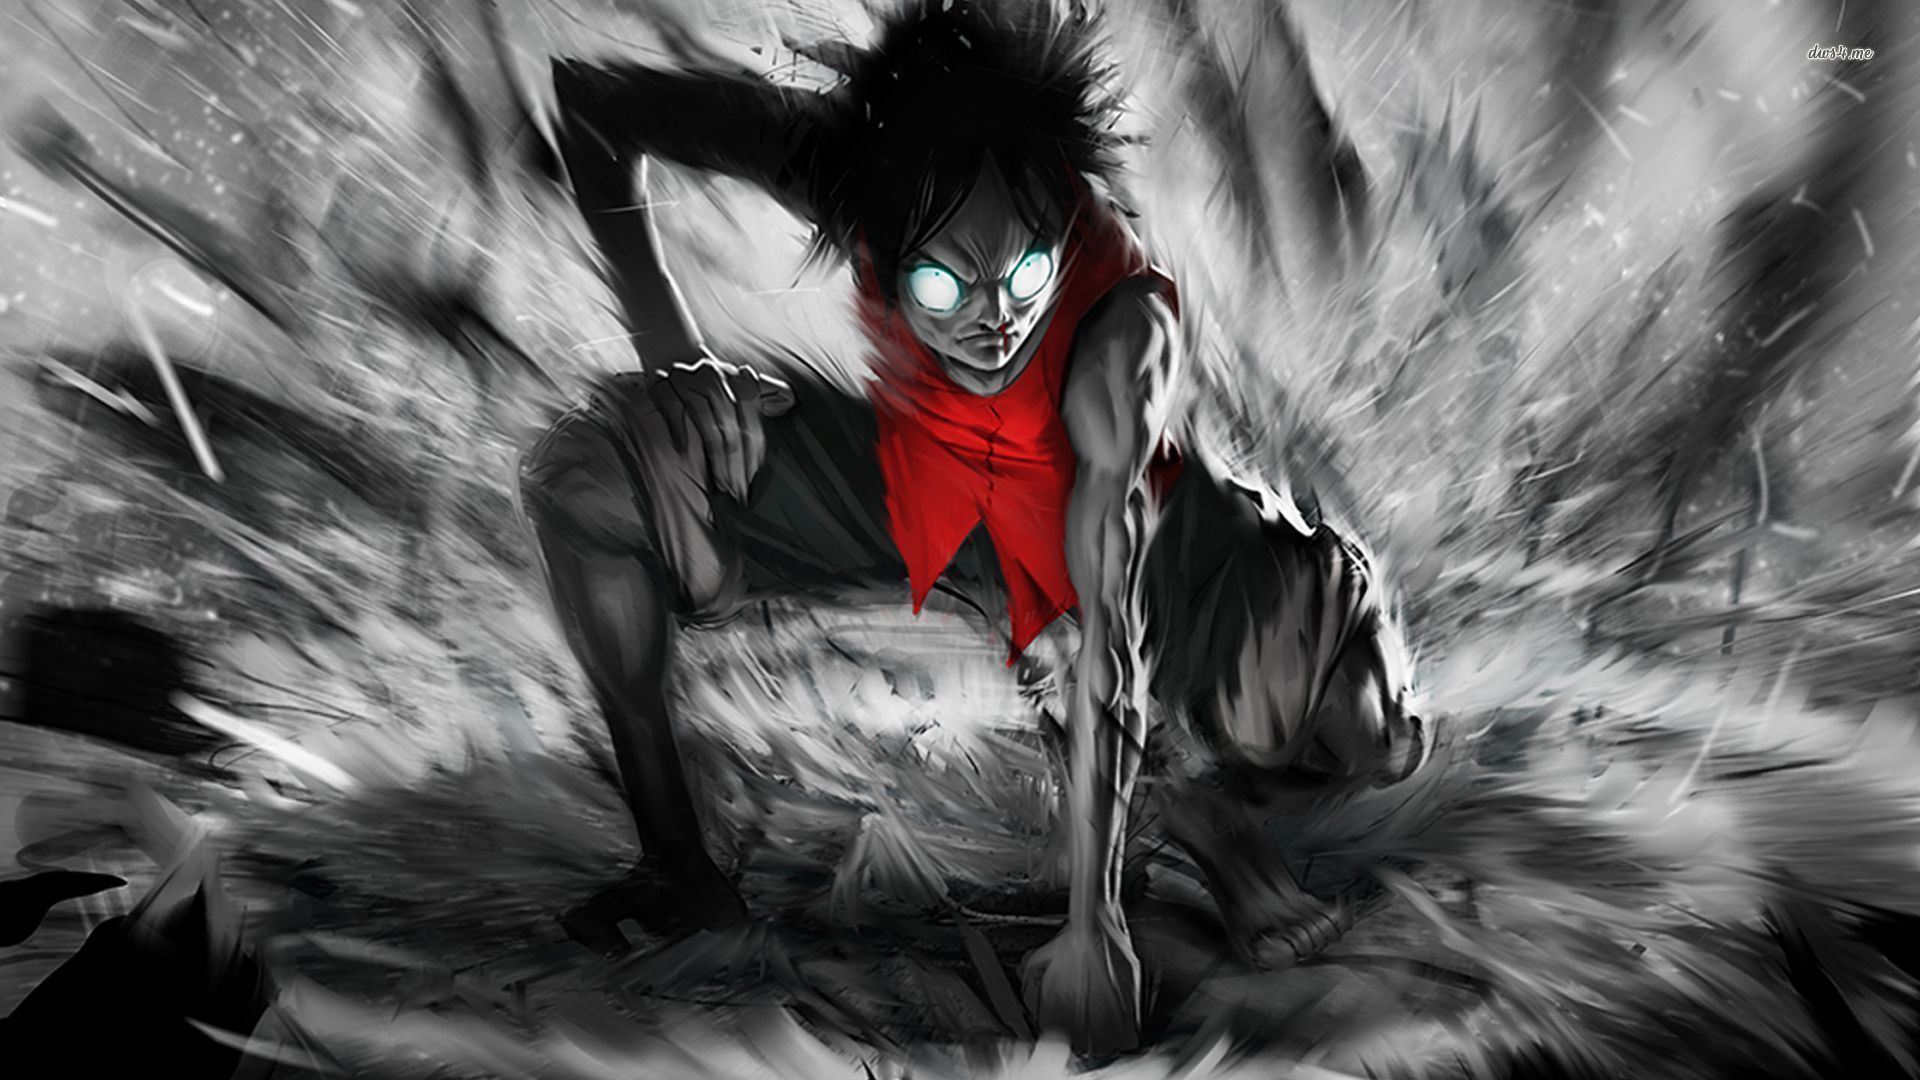 Scary Monkey D. Luffy - One Piece wallpaper - Anime wallpapers ...